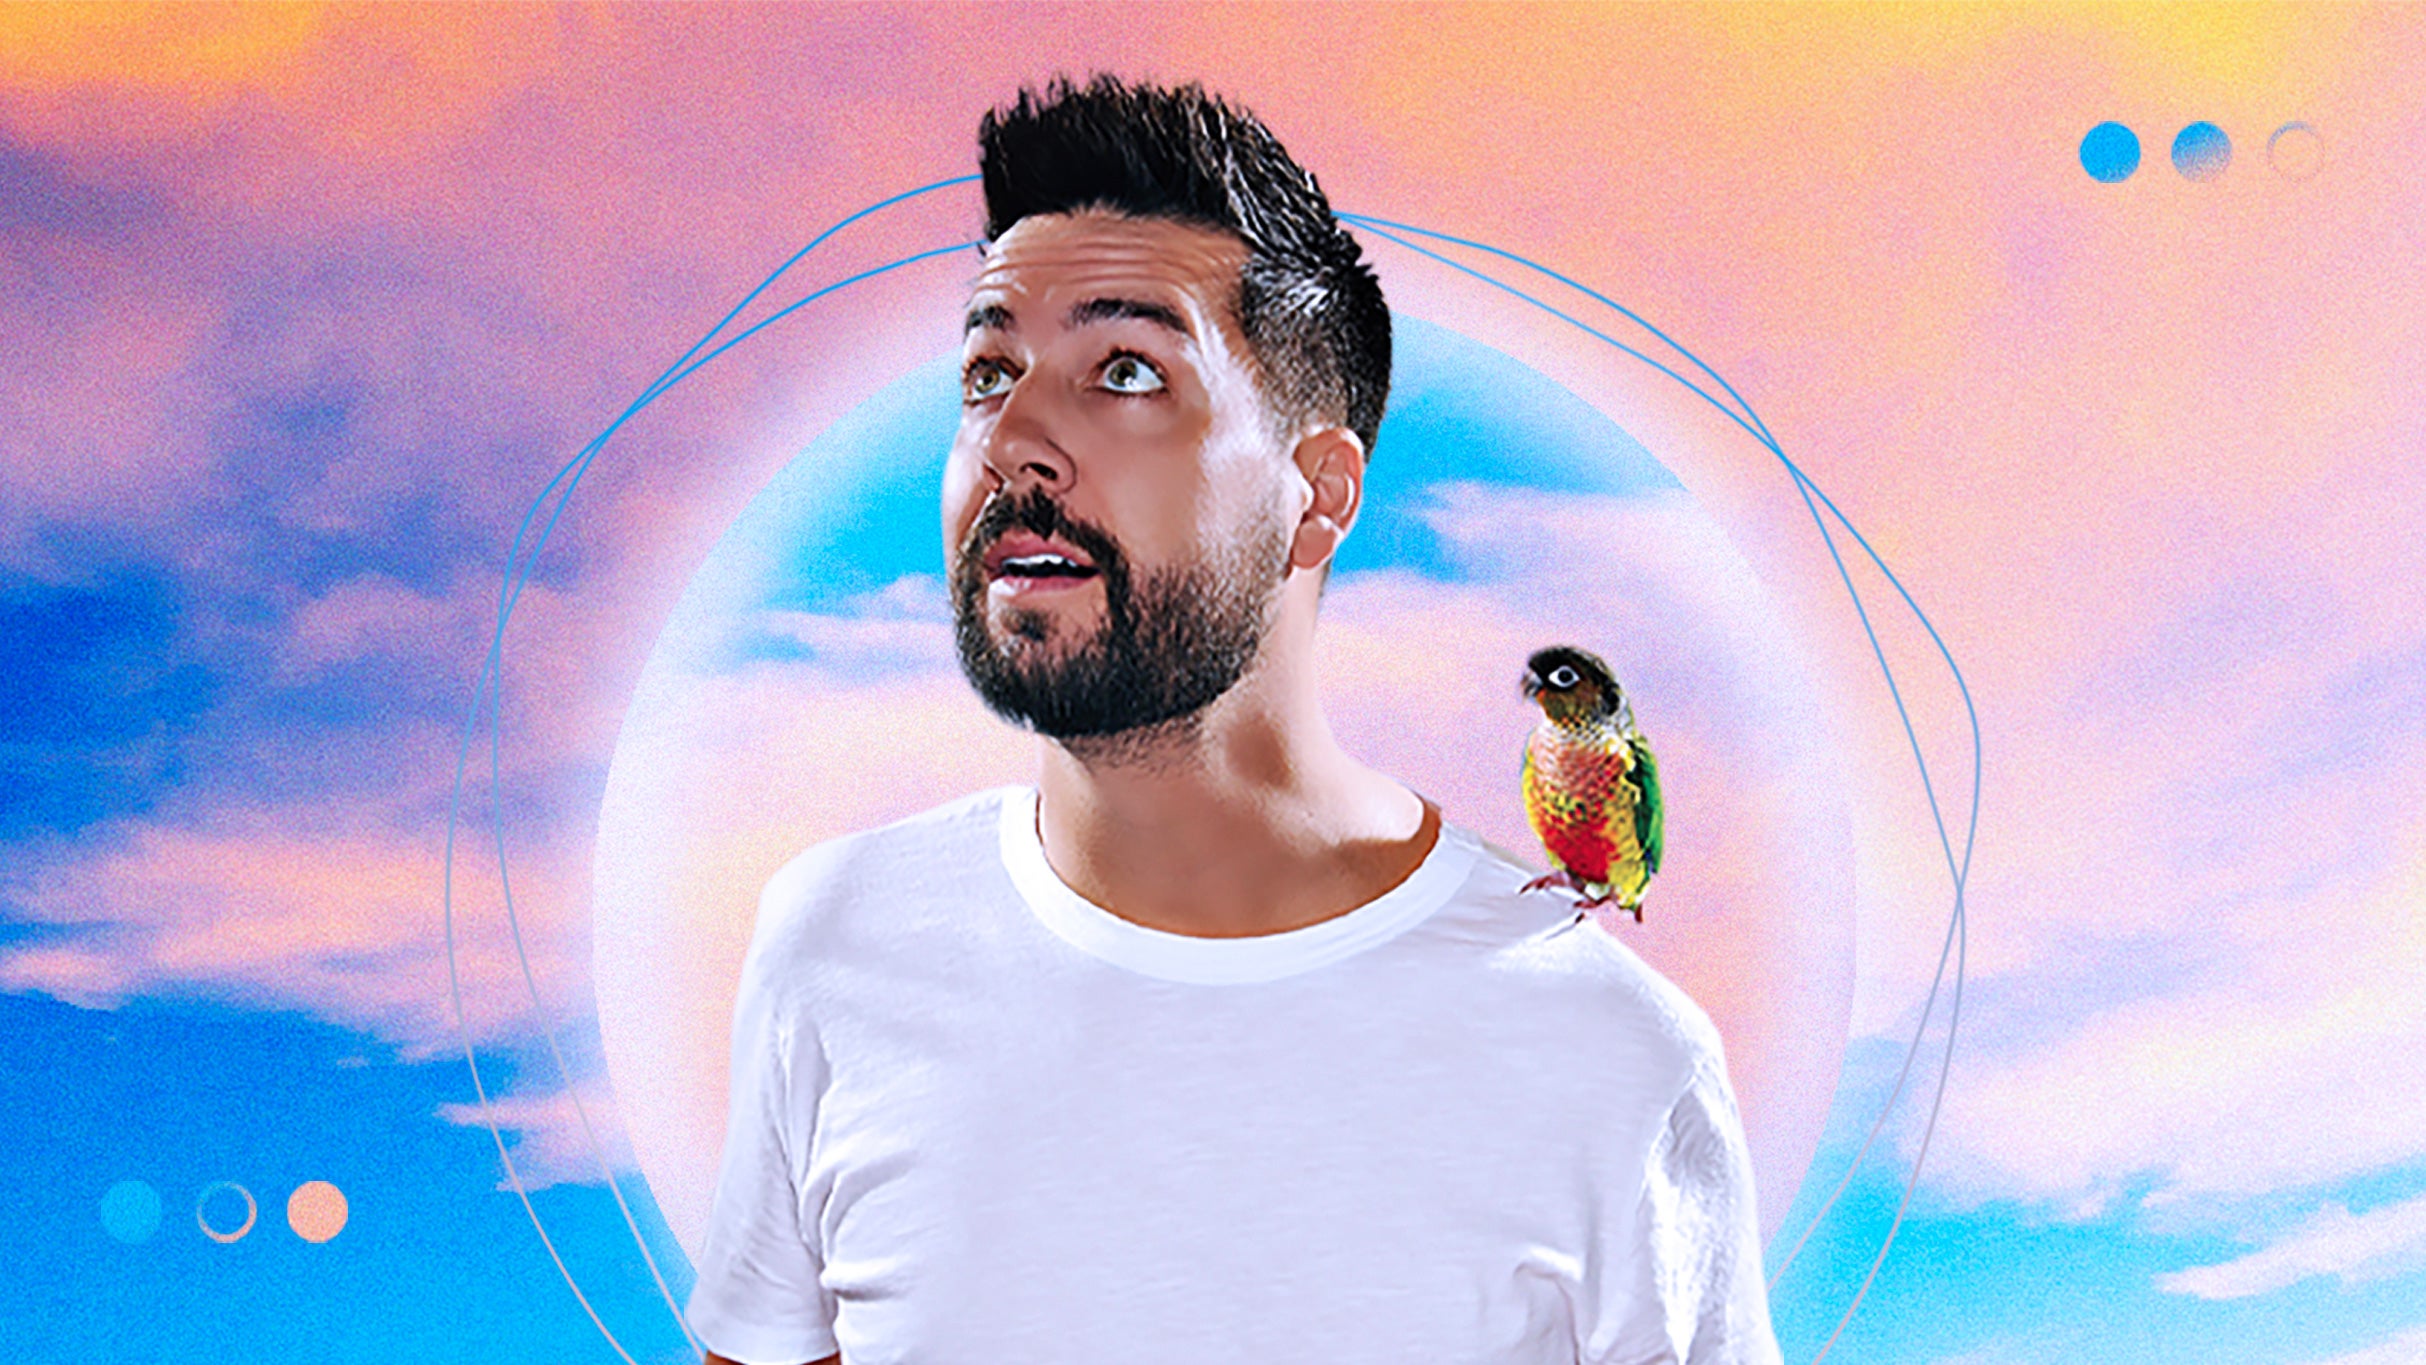 John Crist: The Emotional Support Tour at HOYT SHERMAN PLACE